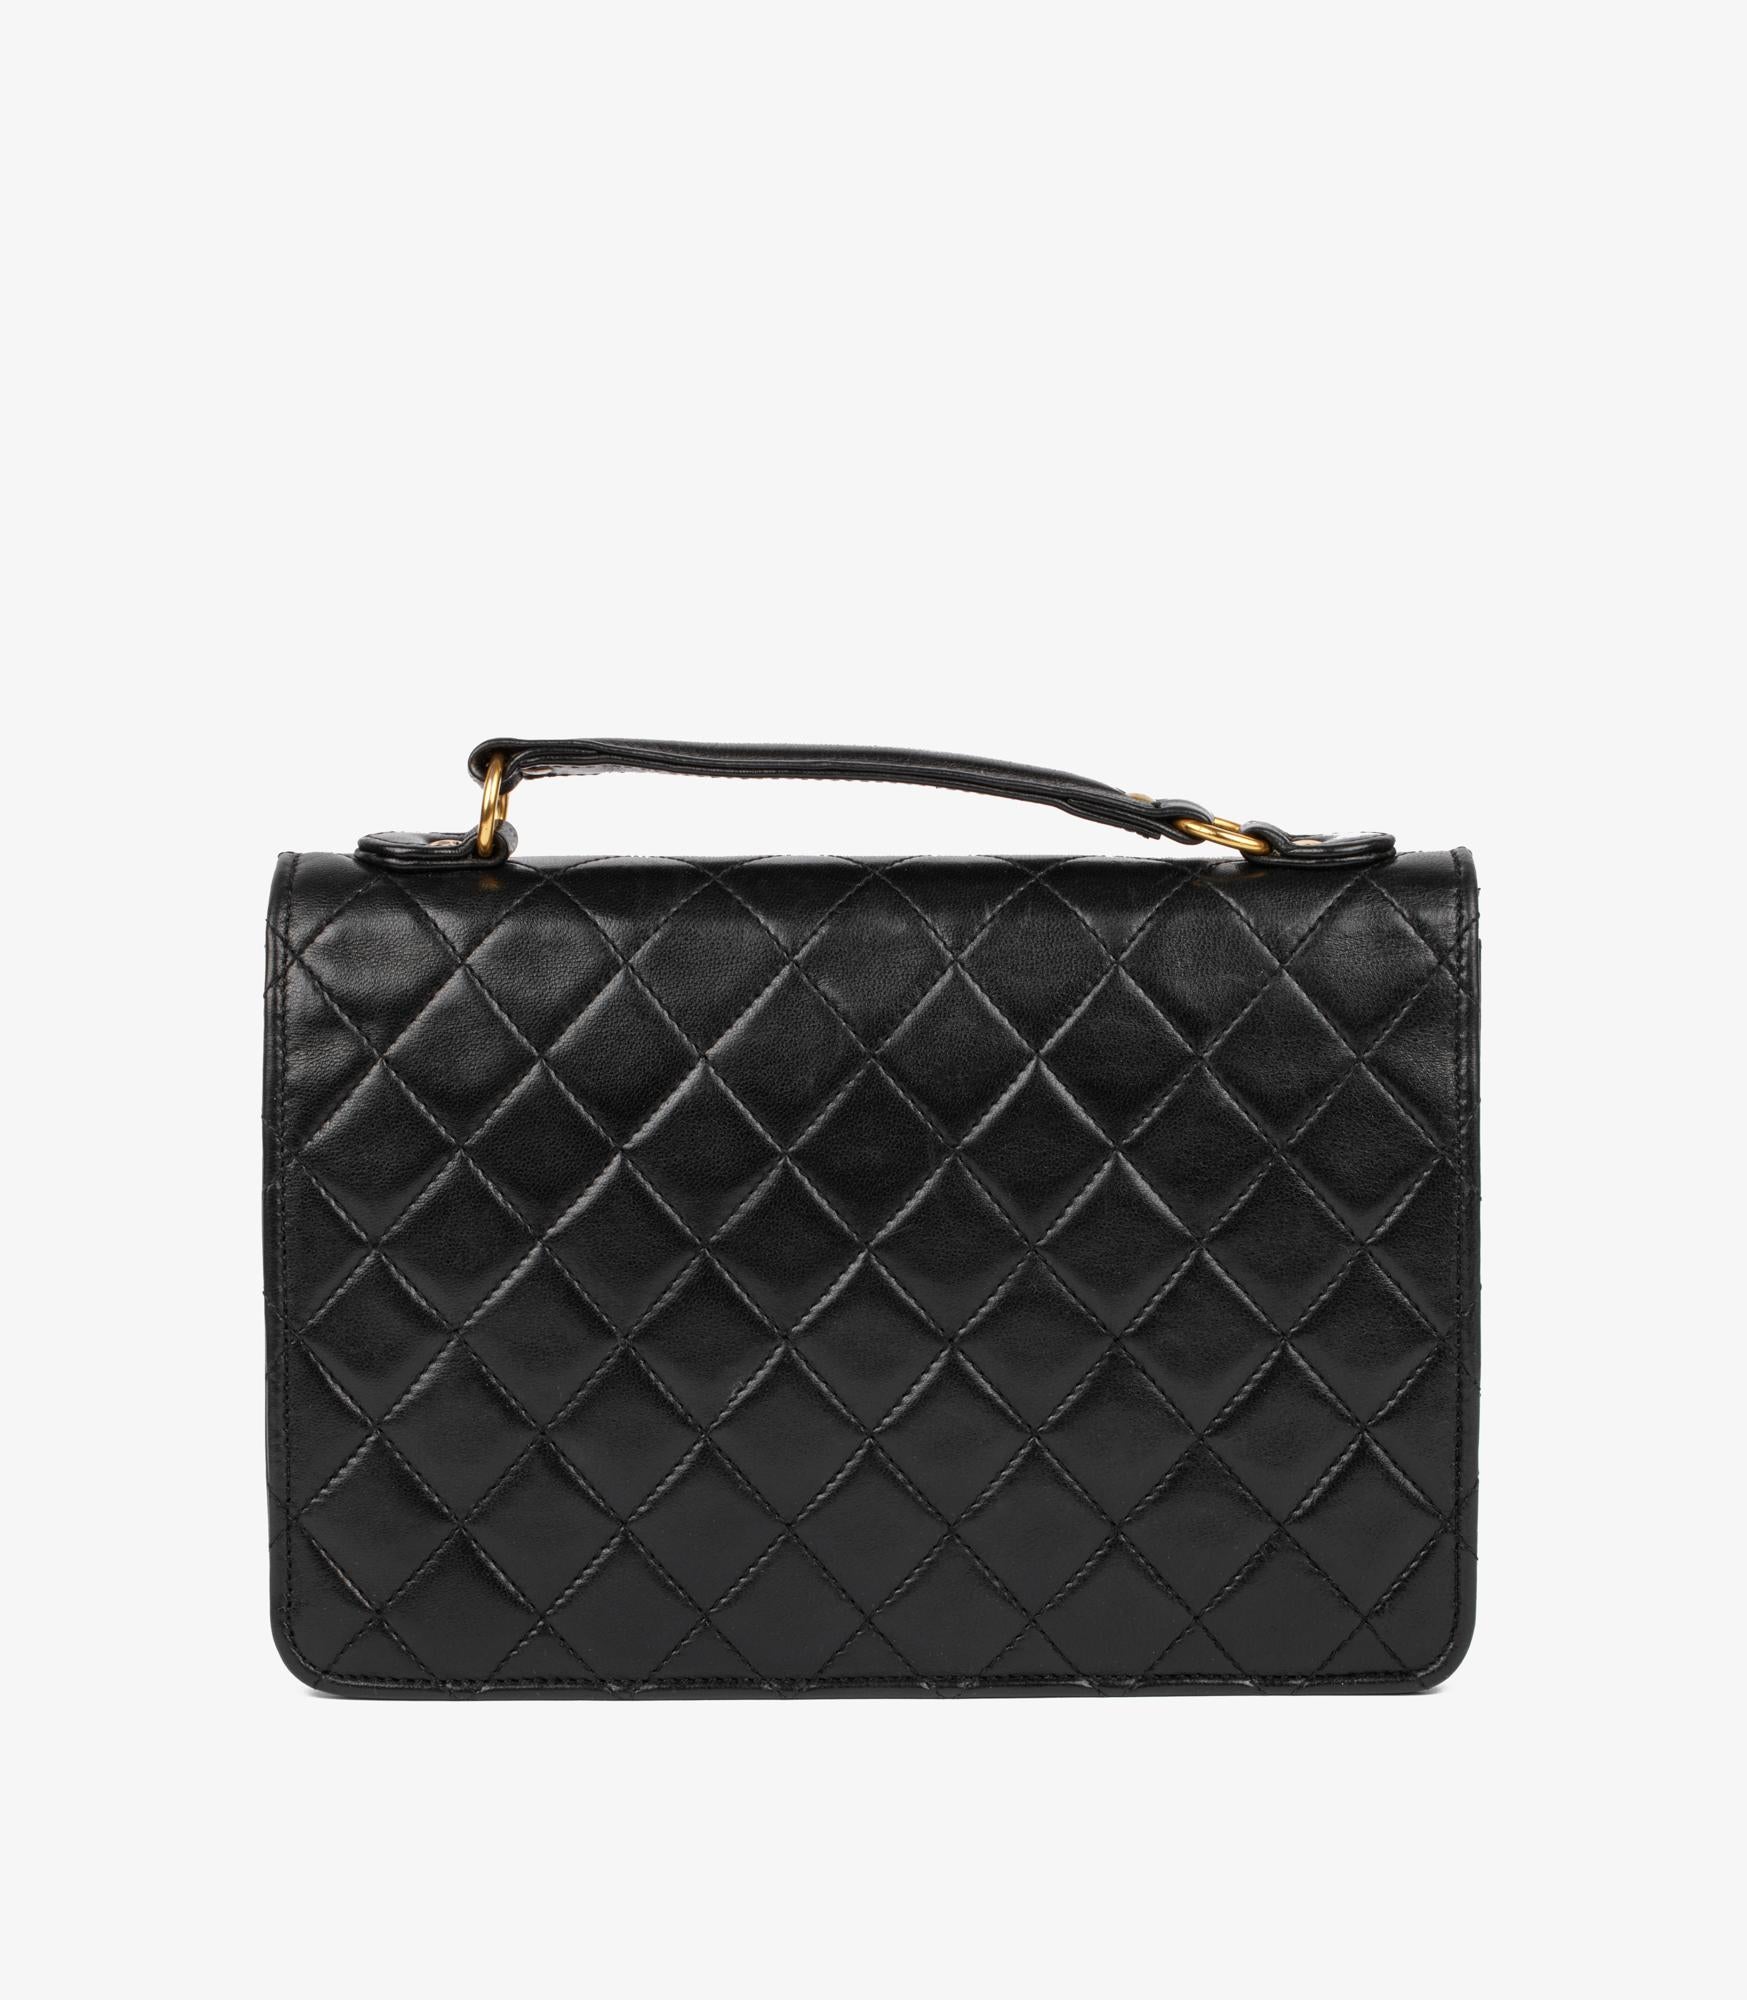 Chanel Black Quilted Lambskin Vintage Small Classic Single Flap Bag en vente 8